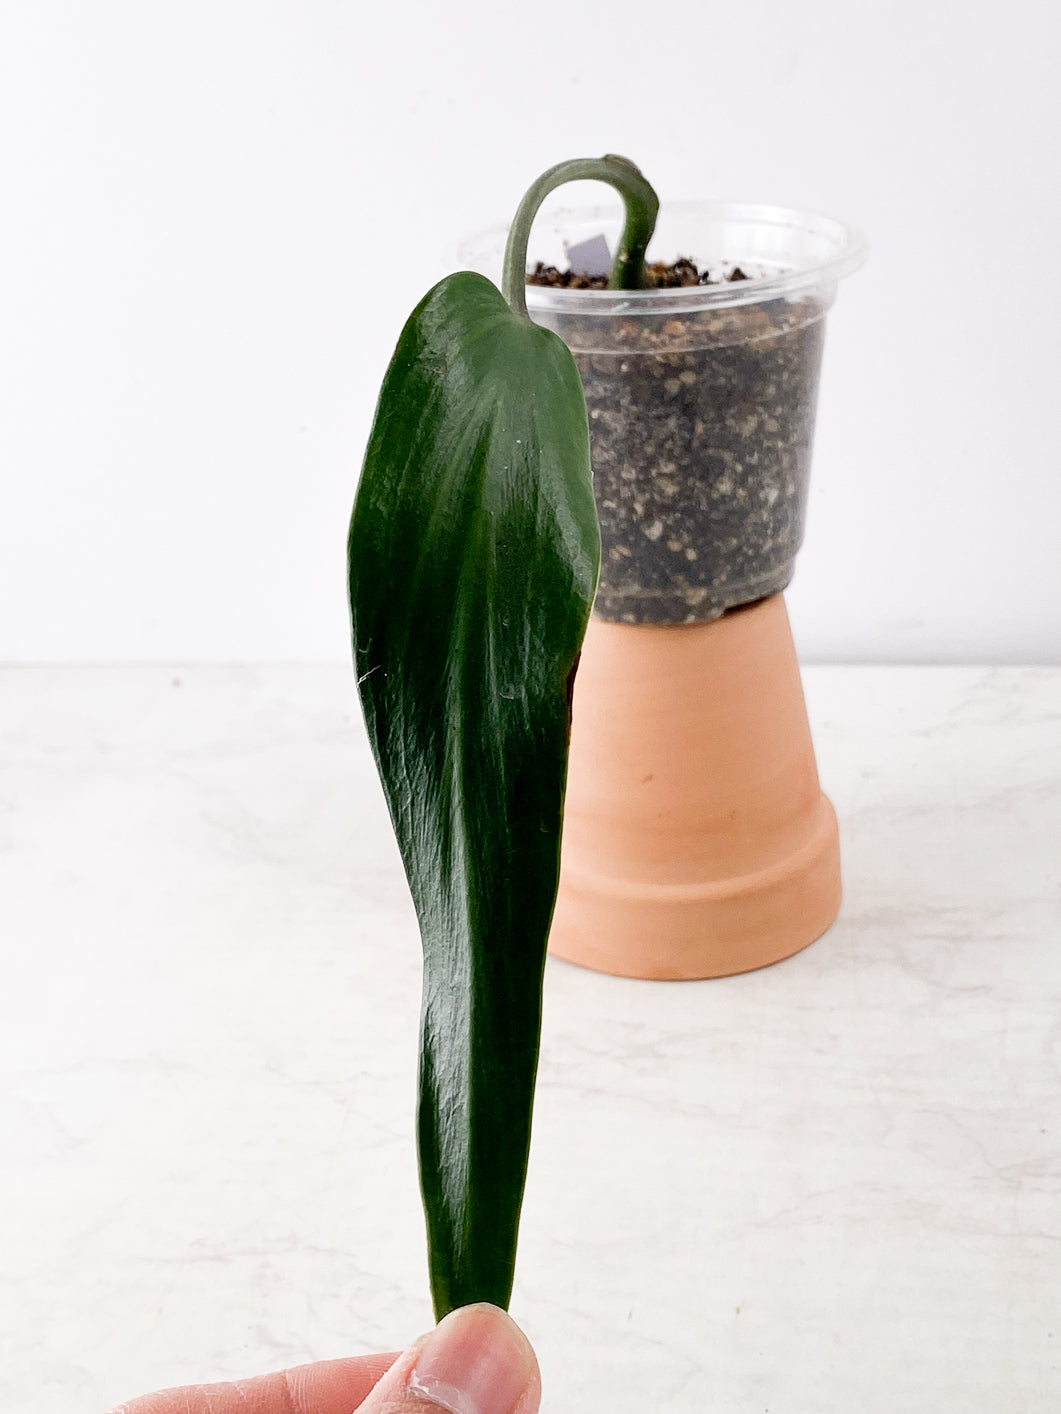 Private Sale: Monstera Burle Marx flame rooting 1 leaf 1 bud slightly rooted